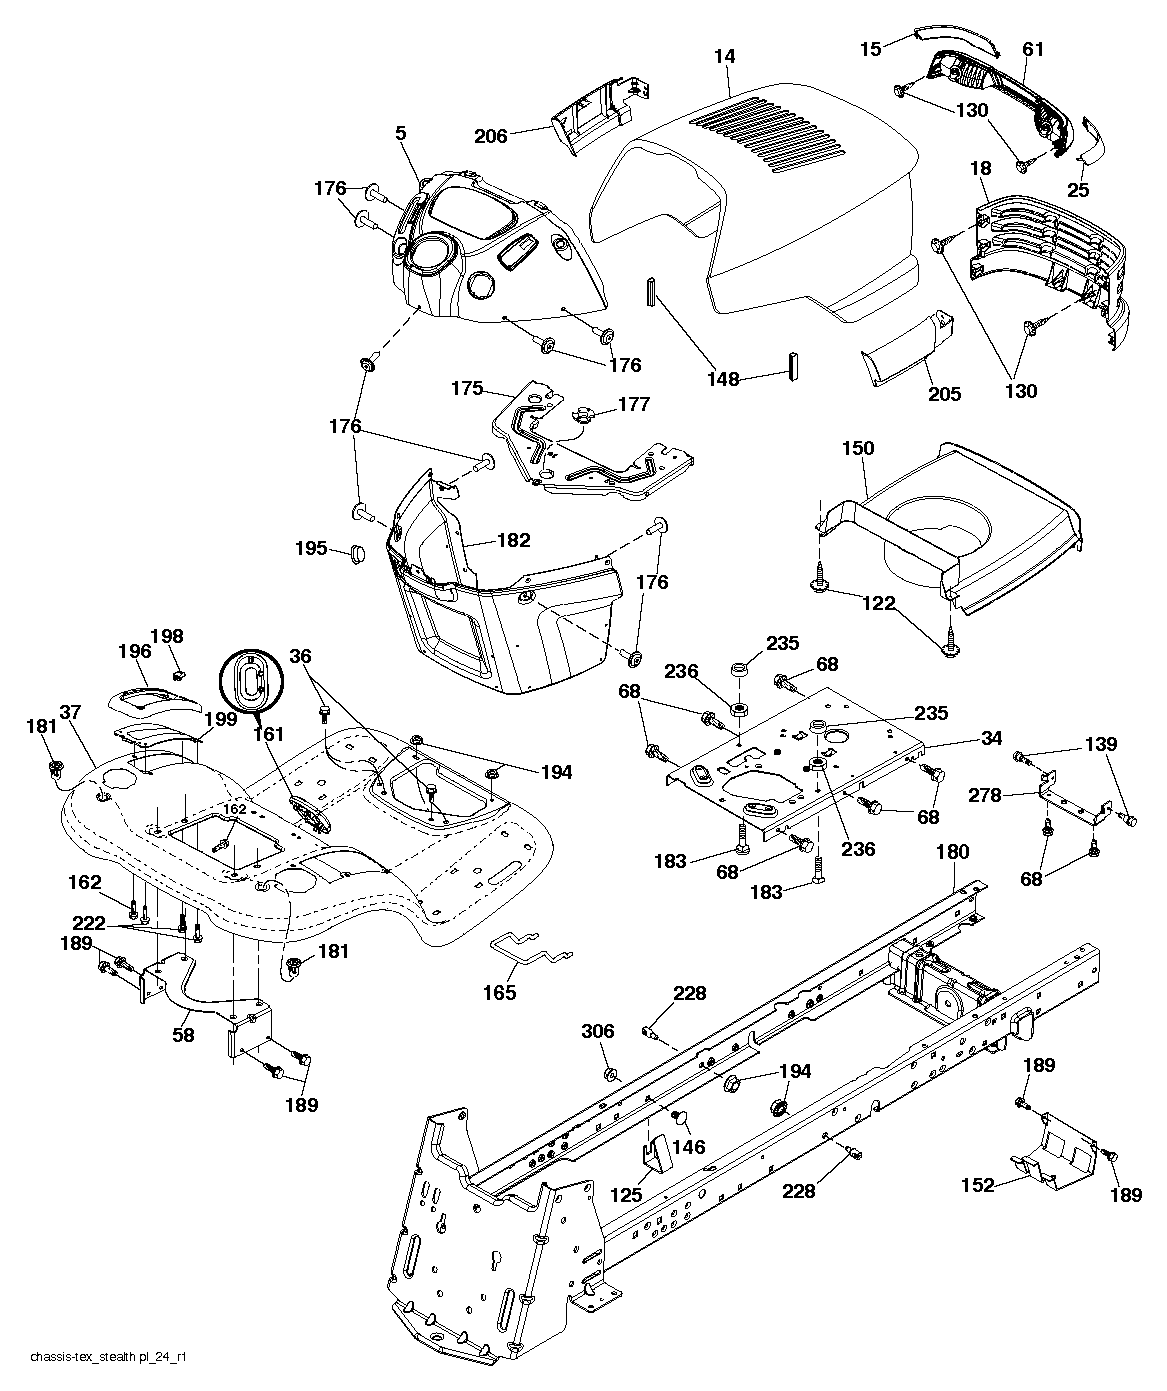 Chassis and appendix 586398601, 586414601, 532182885, 532187114, 532161842, 580910801, 596030701, 532443816, 532194314, 532179763, 596030701, 532192512, 581684801, 596321701, 532171873, 581857901, 532164655, 532190308, 531169901, 532411879, 532142432, 532196826, 532193236, 532400776, 532195228, 582033001, 532404796, 532192551, 874520520, 532428867, 873900500, 532404137, 532411878, 532441552, 532196377, 532187111, 532187112, 532137729, 593824001, 532406129, 873930500, 532196394, 532409149, 532400944